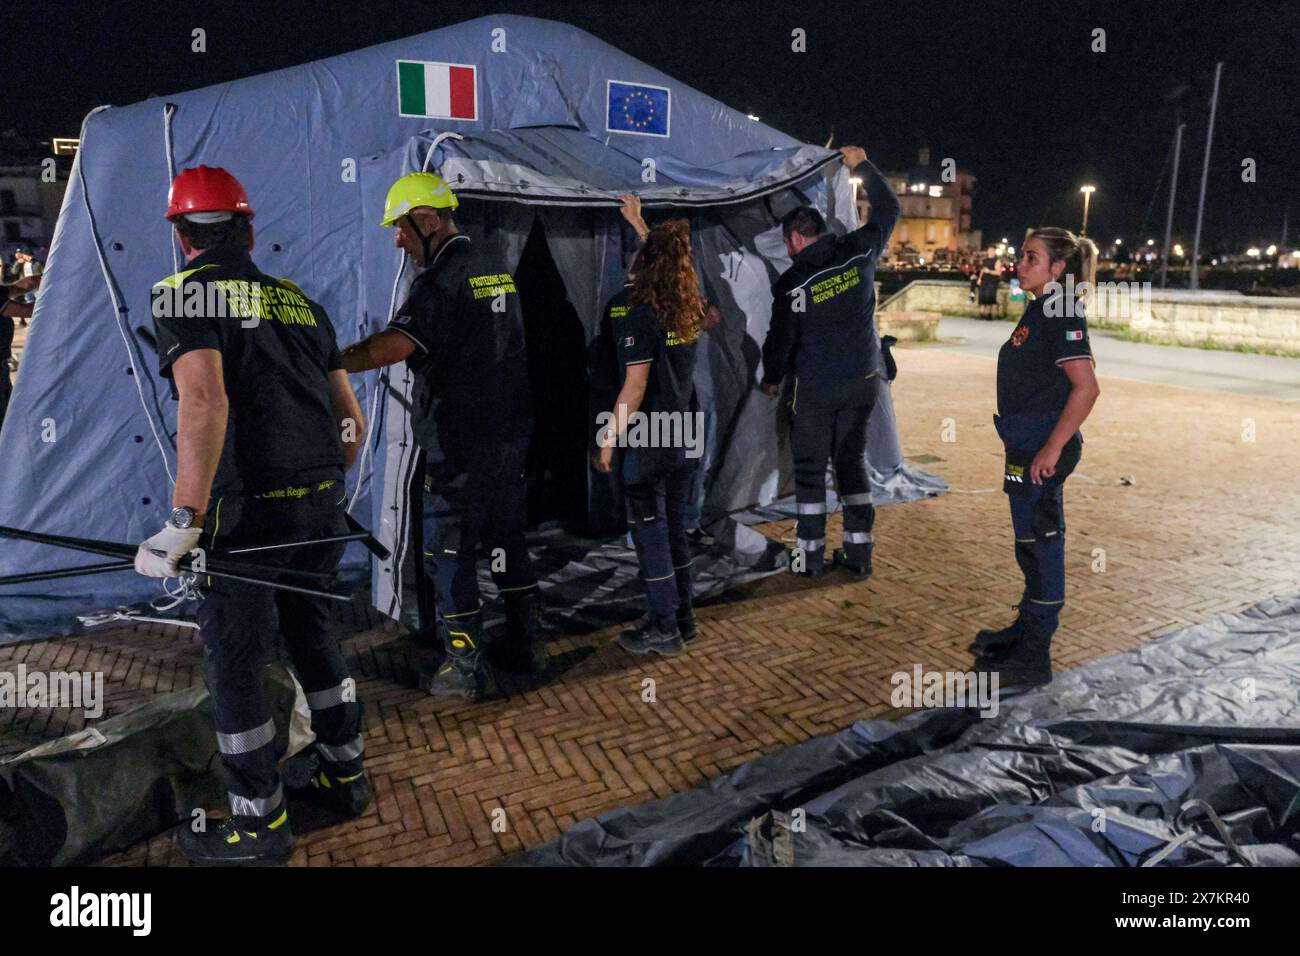 Italy: Campi Flegrei, bradisismo Campania s civil protection set up a tensile structure at the port of pozzuoli for people who are not confident about returning to their homes after the earthquake tremors, near Naples, southern Italy, 20 May 2024. The tremor that occurred at 8.10pm with epicentre in the Campi Flegrei was of magnitude 4.4. This was reported by the National Institute of Geophysics and Volcanology, according to which the depth of the quake was three kilometres. ABP01892 Copyright: xAntonioxBalascox Stock Photo